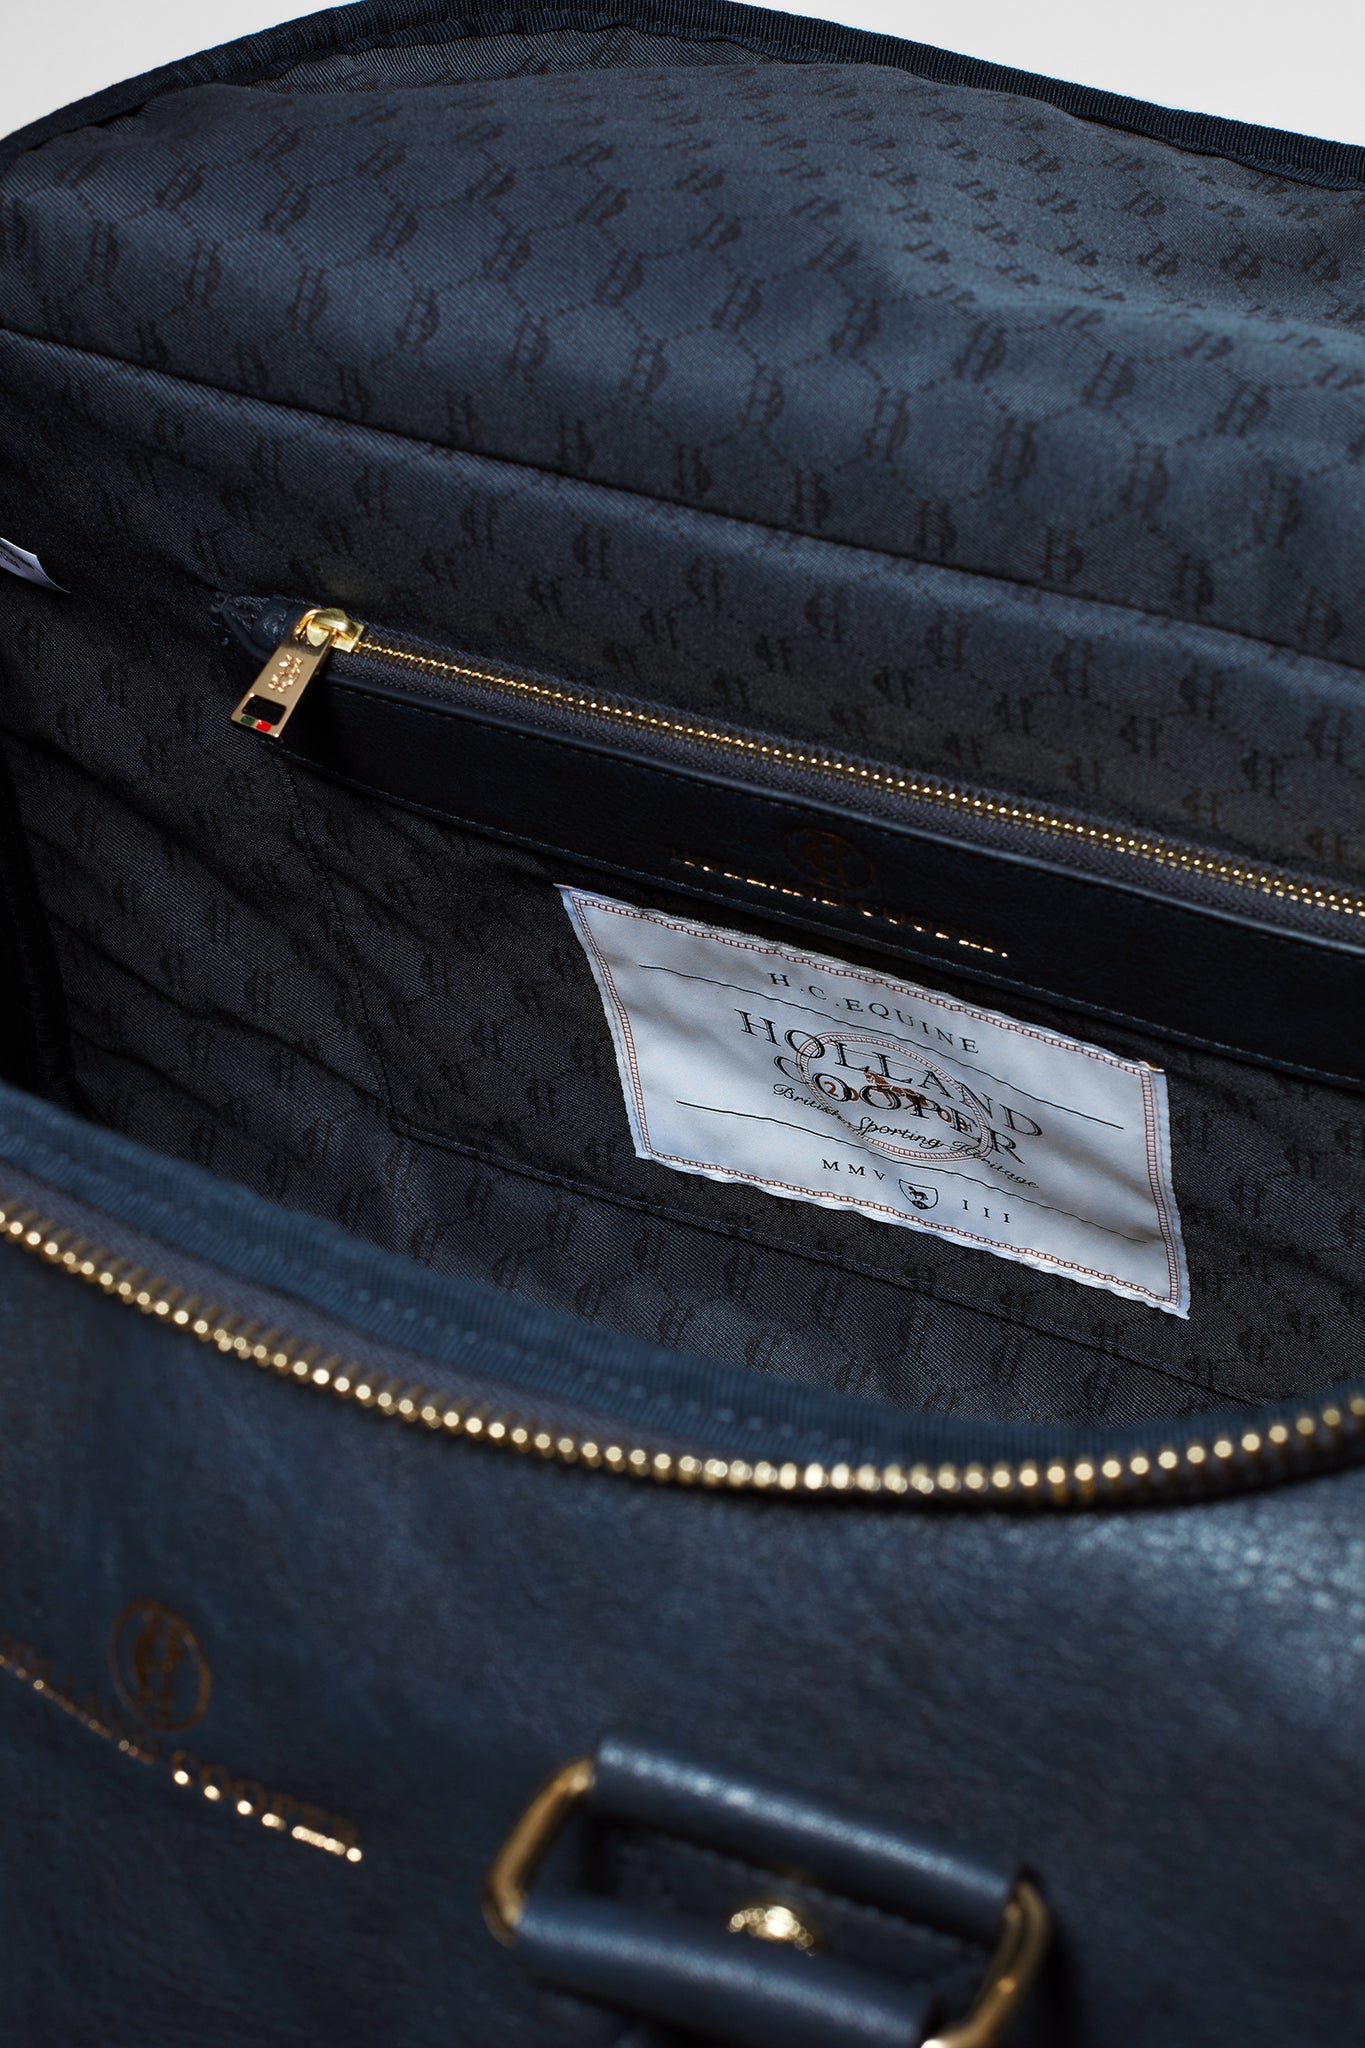 inside of navy faux leather holdall bag showing navy monogram print lining and internal zip pocket